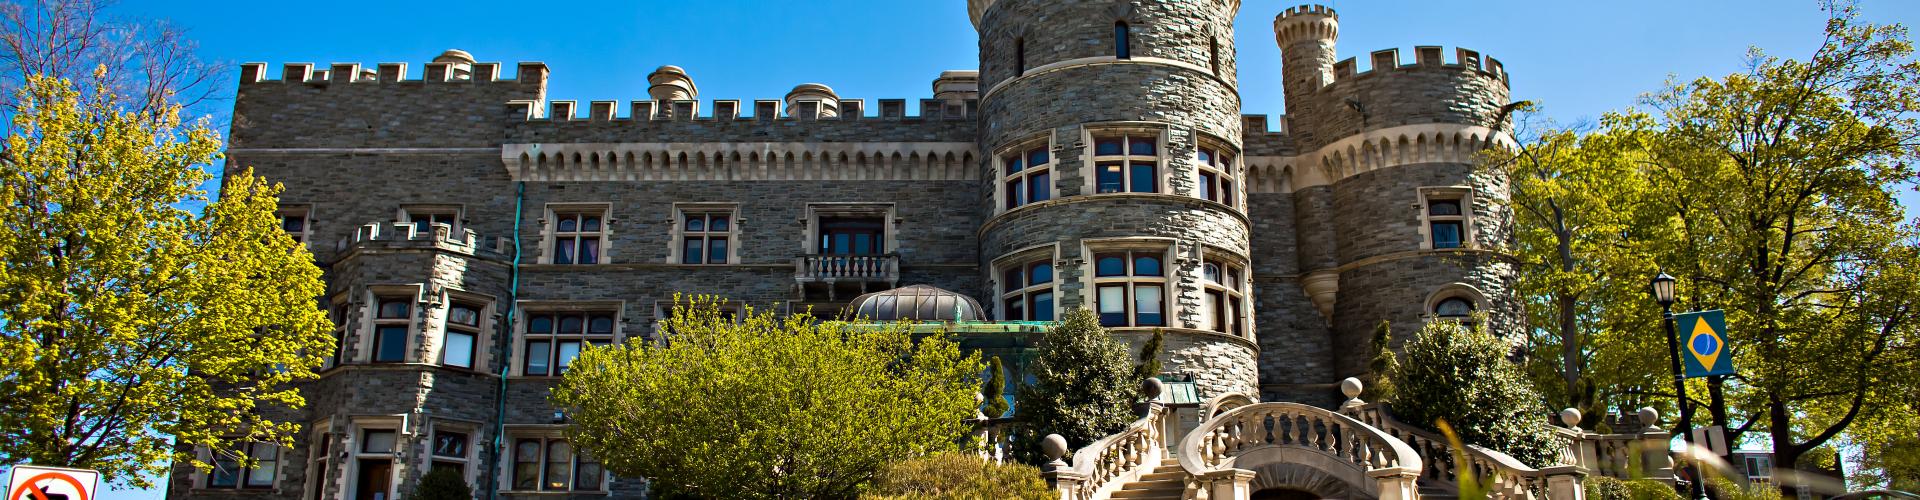 Arcadia University Tuition and Fees | CollegeVine